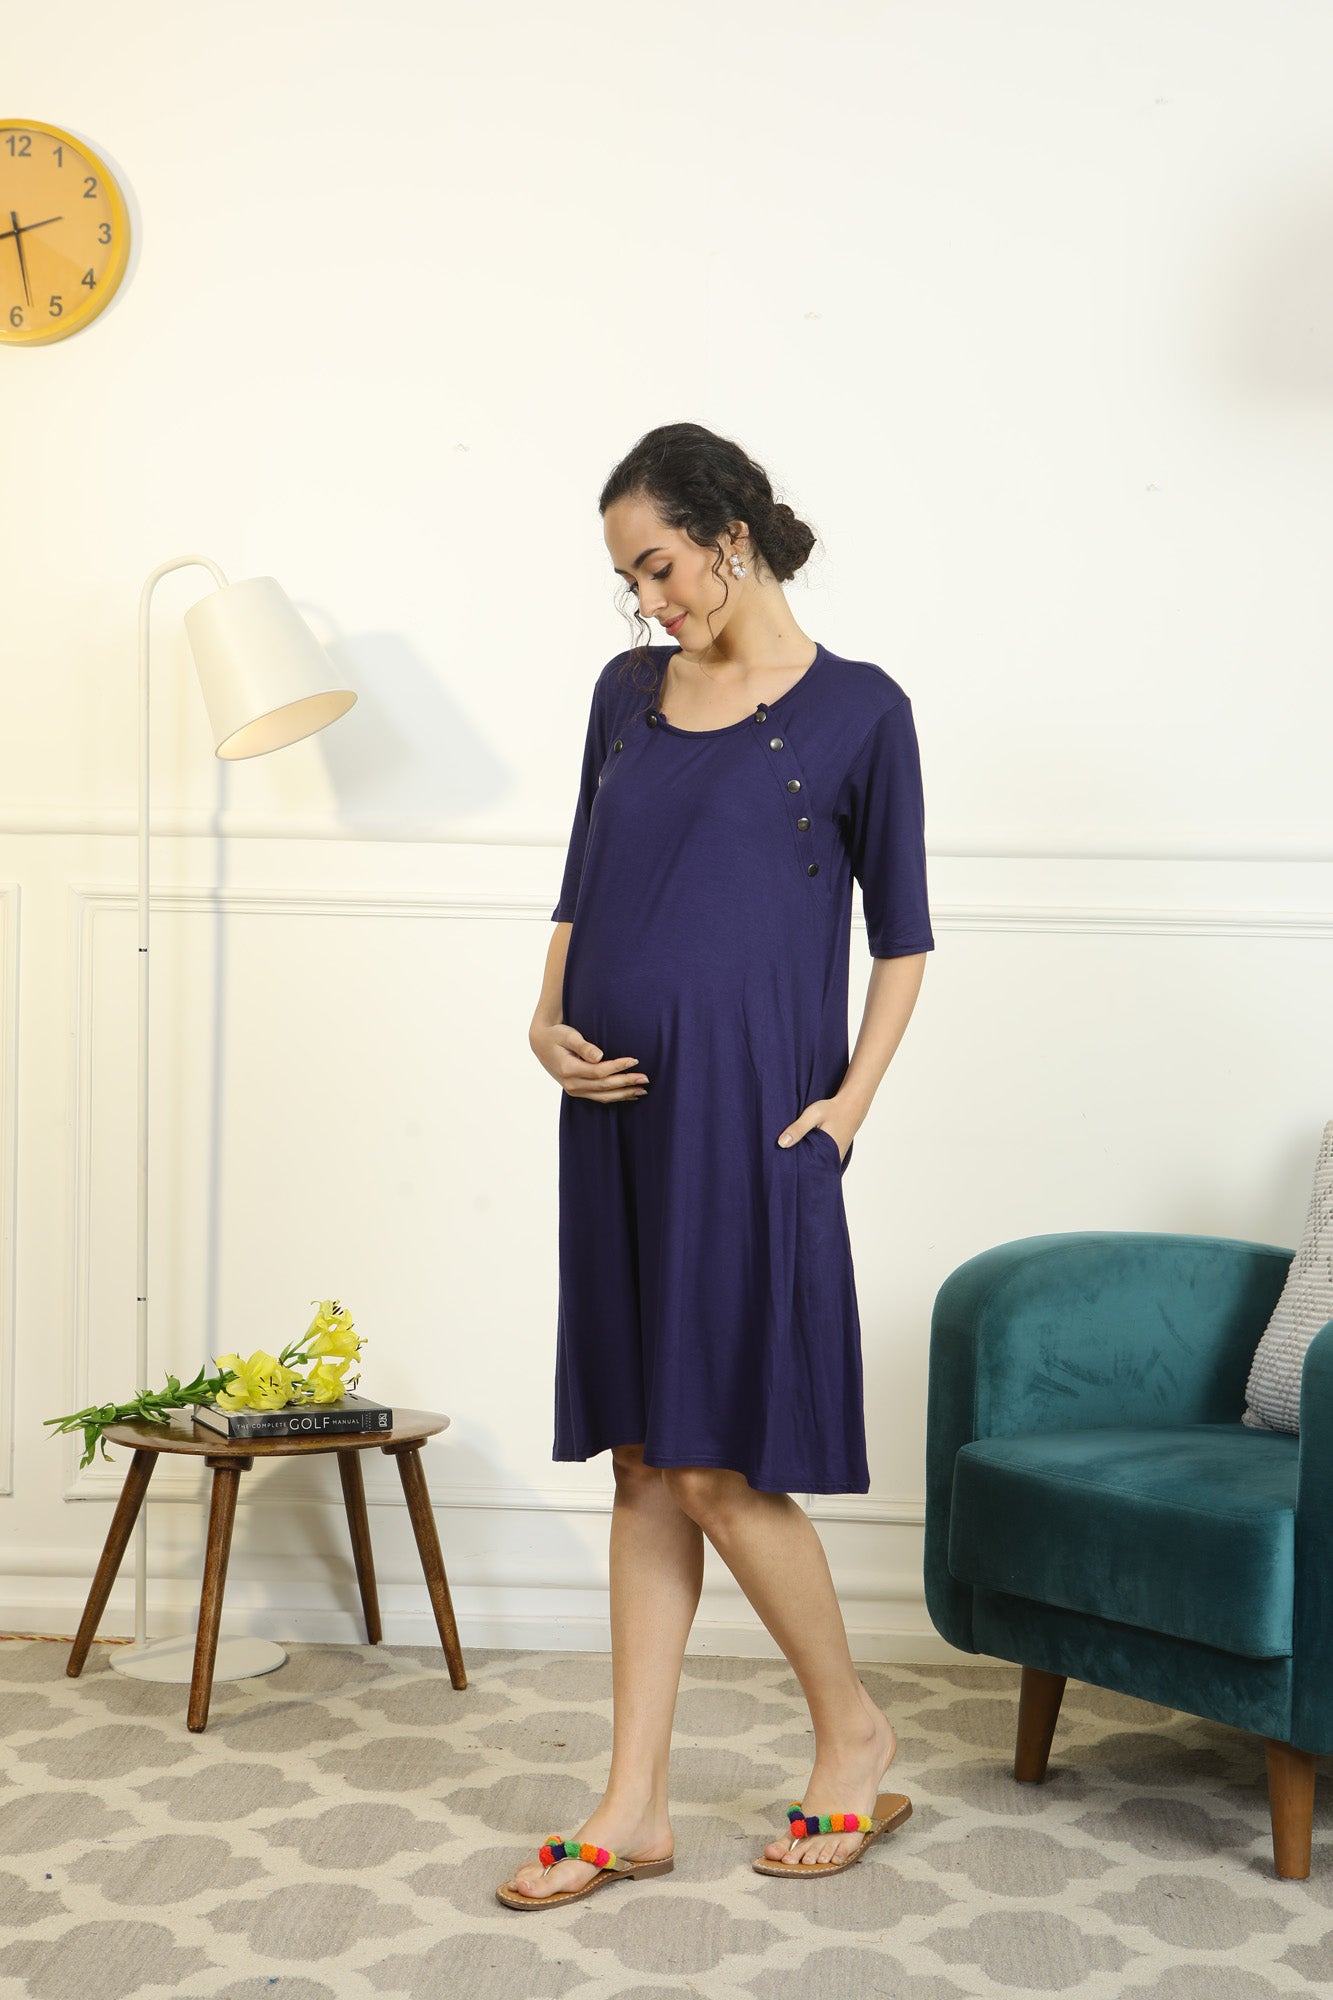 Nursing - Maternity: Clothing, Shoes & Accessories: Dresses, Tops & Tees,  Sleep & Lounge & More 